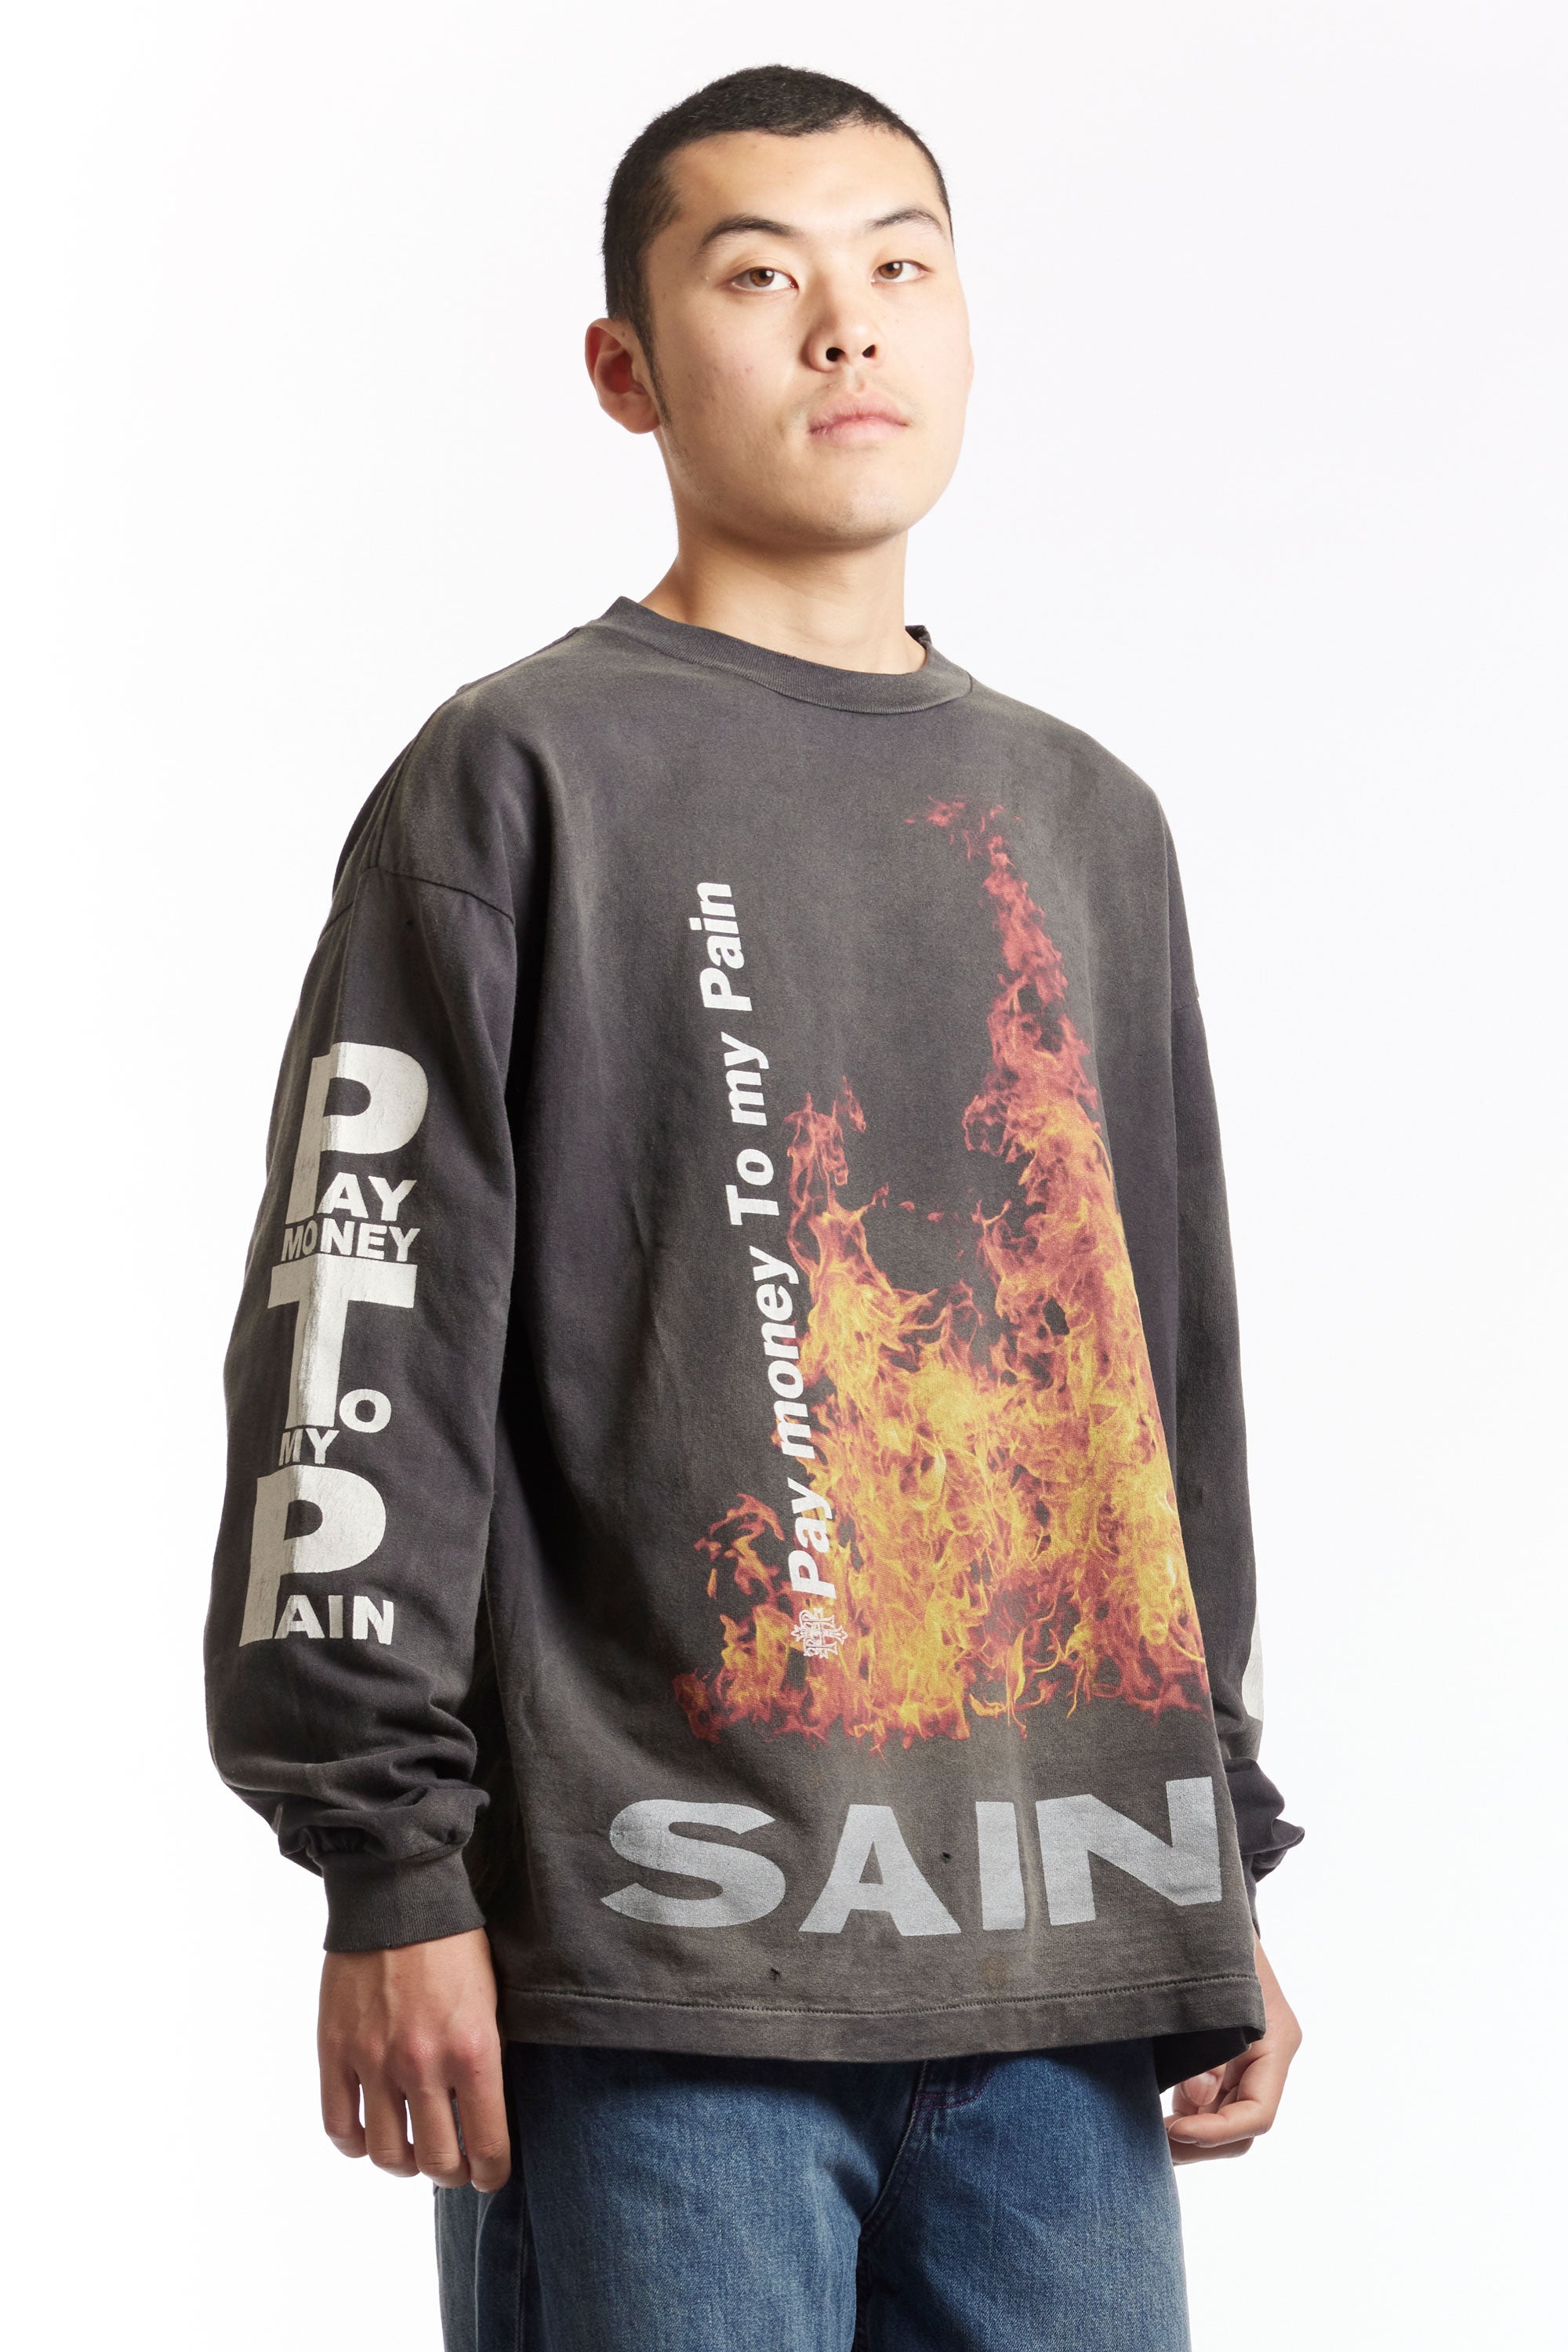 ST MXXXXXX - PAY MONEY TO MY PAIN SUNRISE TO SUNSET LS TEE 